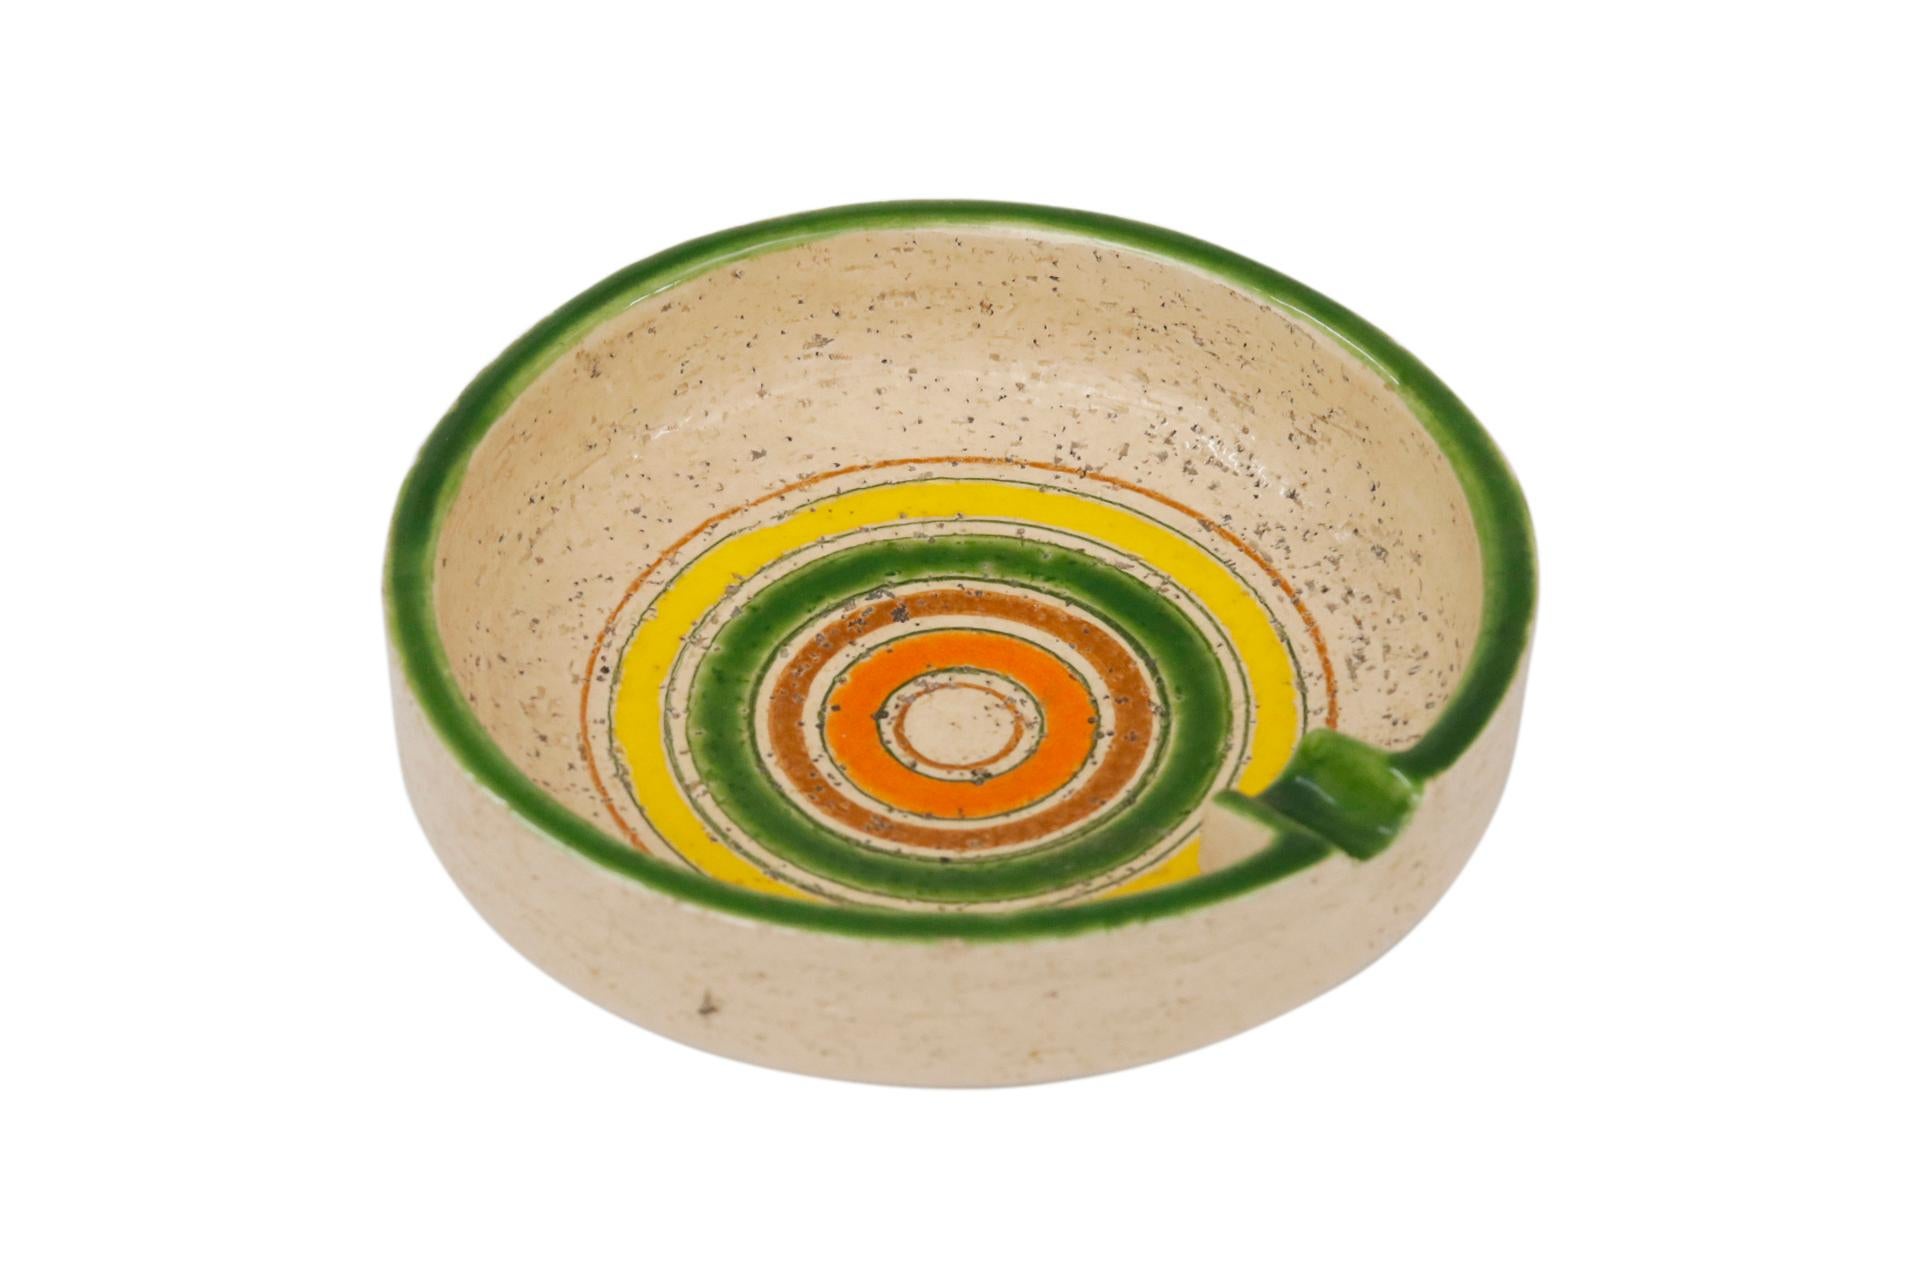 A 1970’s Bitossi Italian ceramic ashtray decorated with colorful concentric circles in orange, brown, green and yellow on a tan background. The rim is finished in green with a single cigarette holder. Marked Italy underneath.